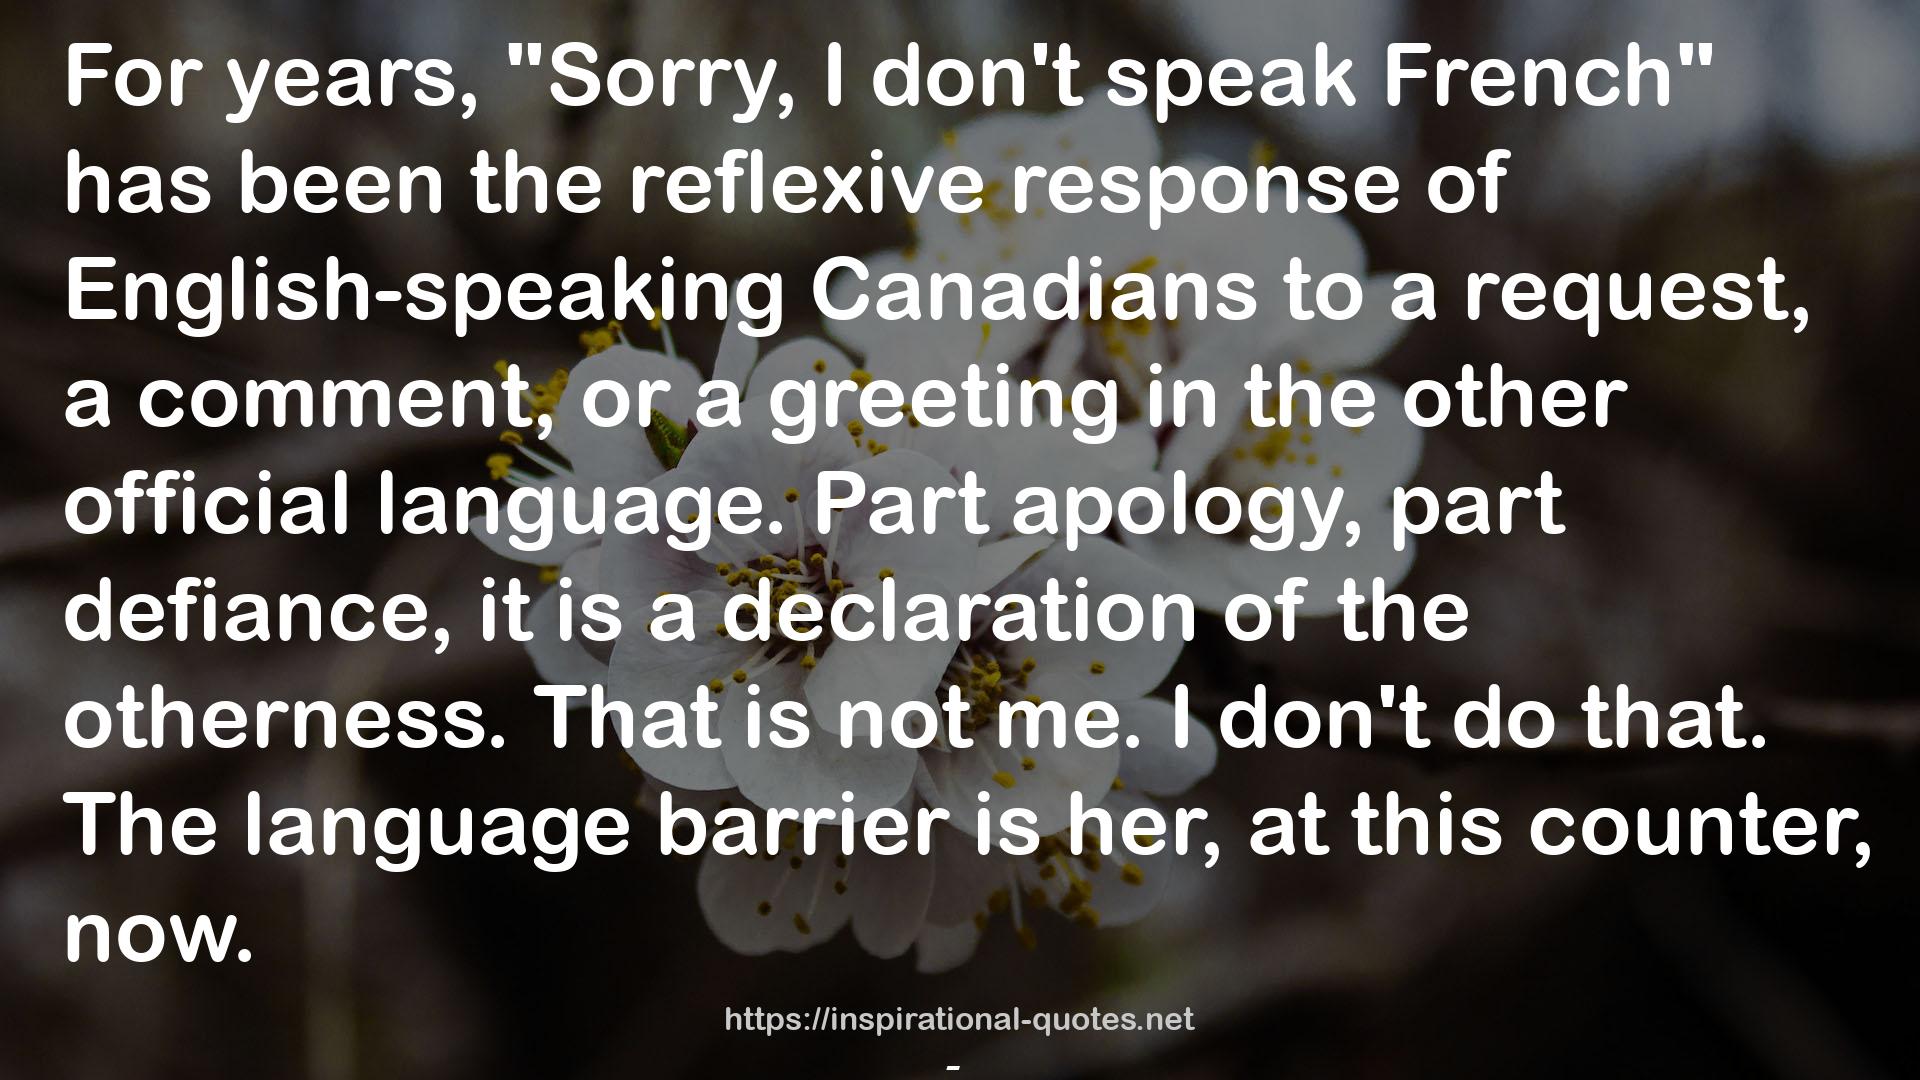 Sorry, I Don't Speak French: Confronting the Canadian Crisis That Won't Go Away QUOTES